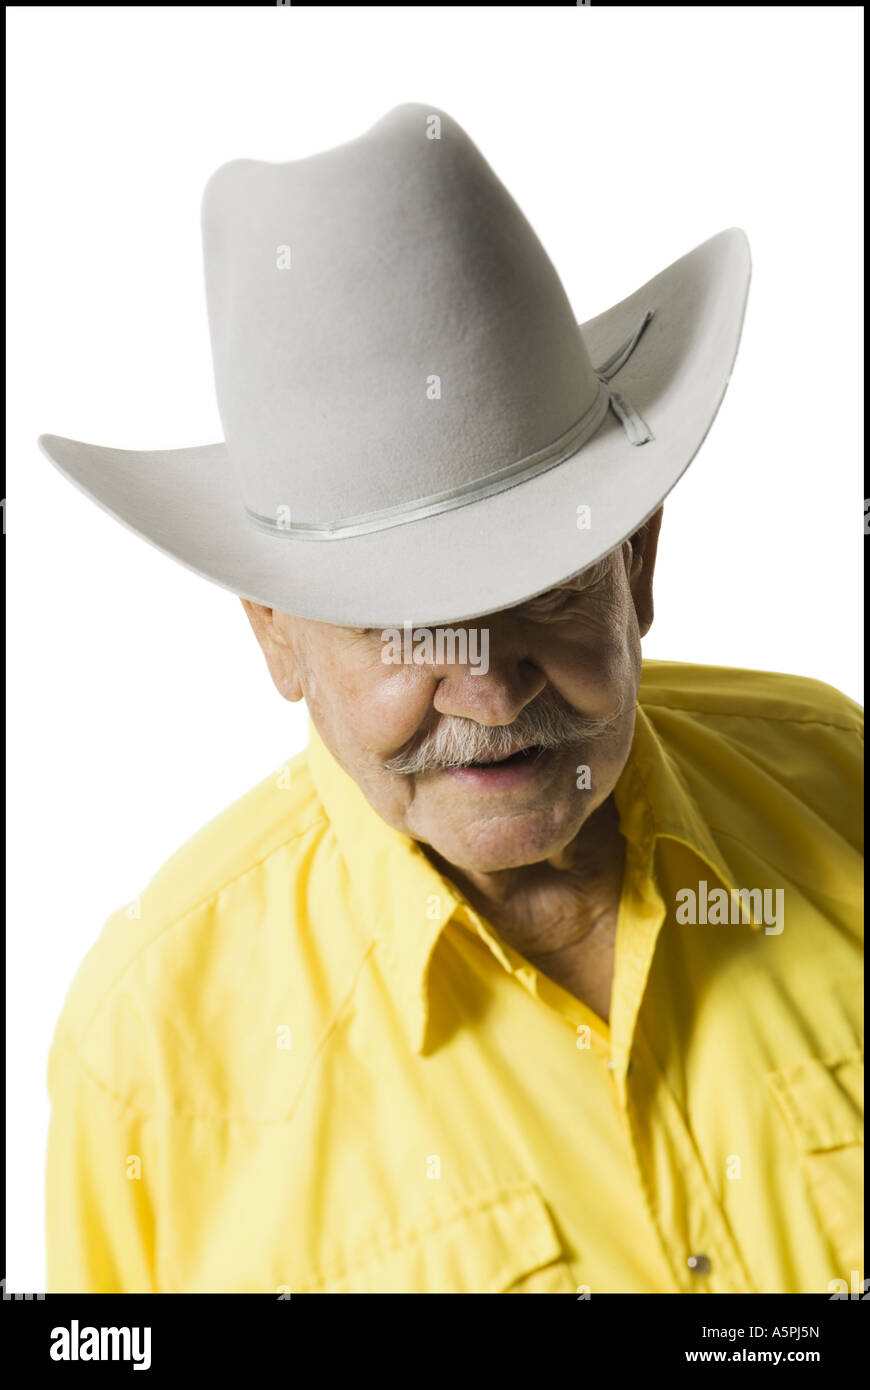 Older man in western clothing Stock Photo